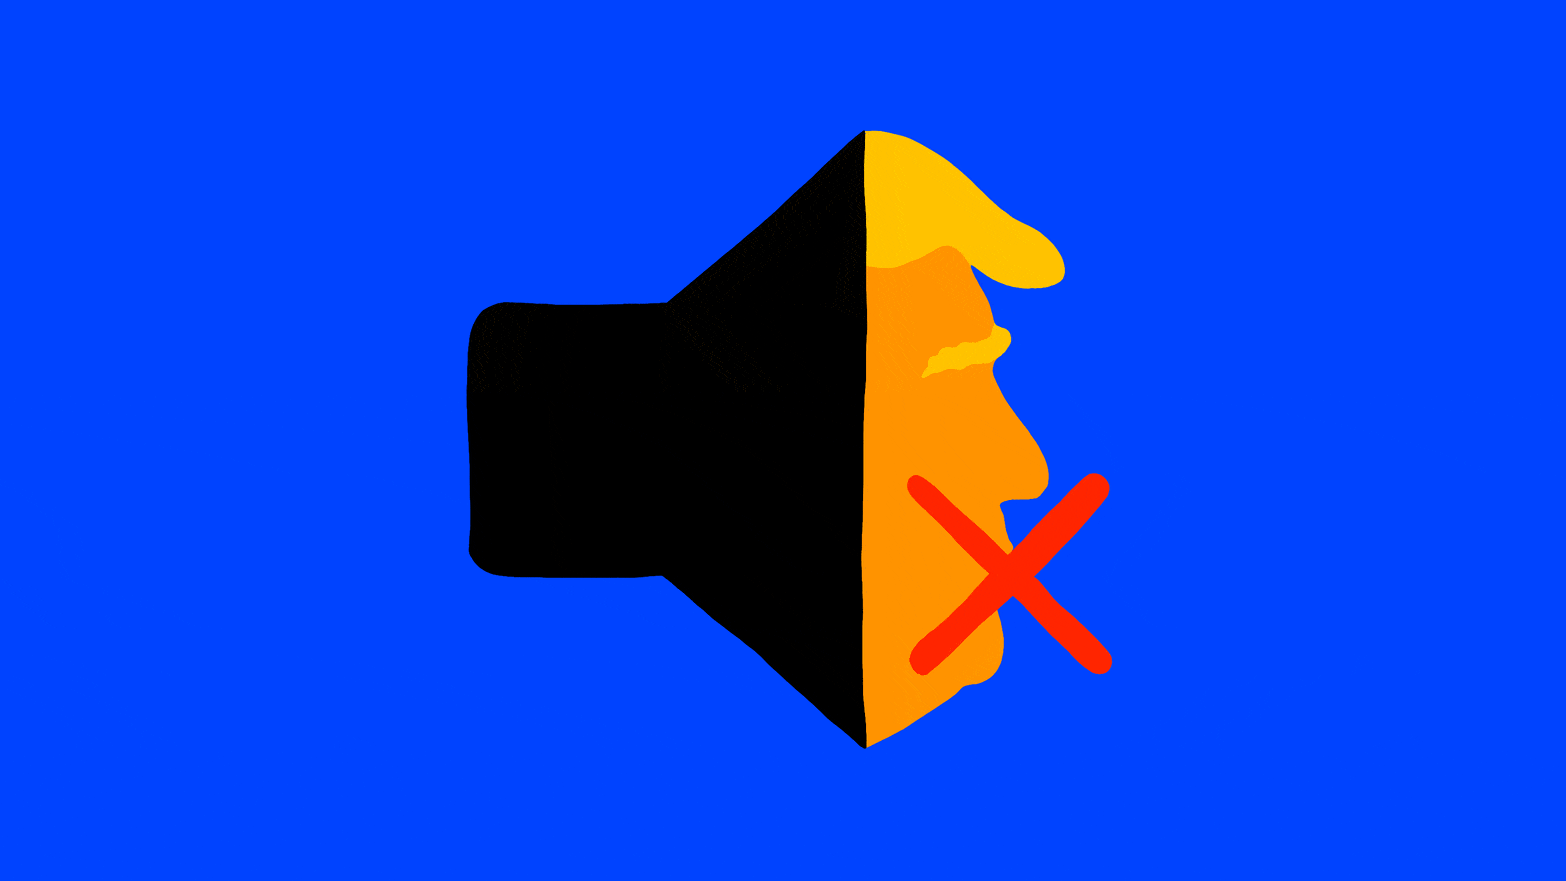 Illustration of a flashing muted volume symbol with Donald Trump's profile.